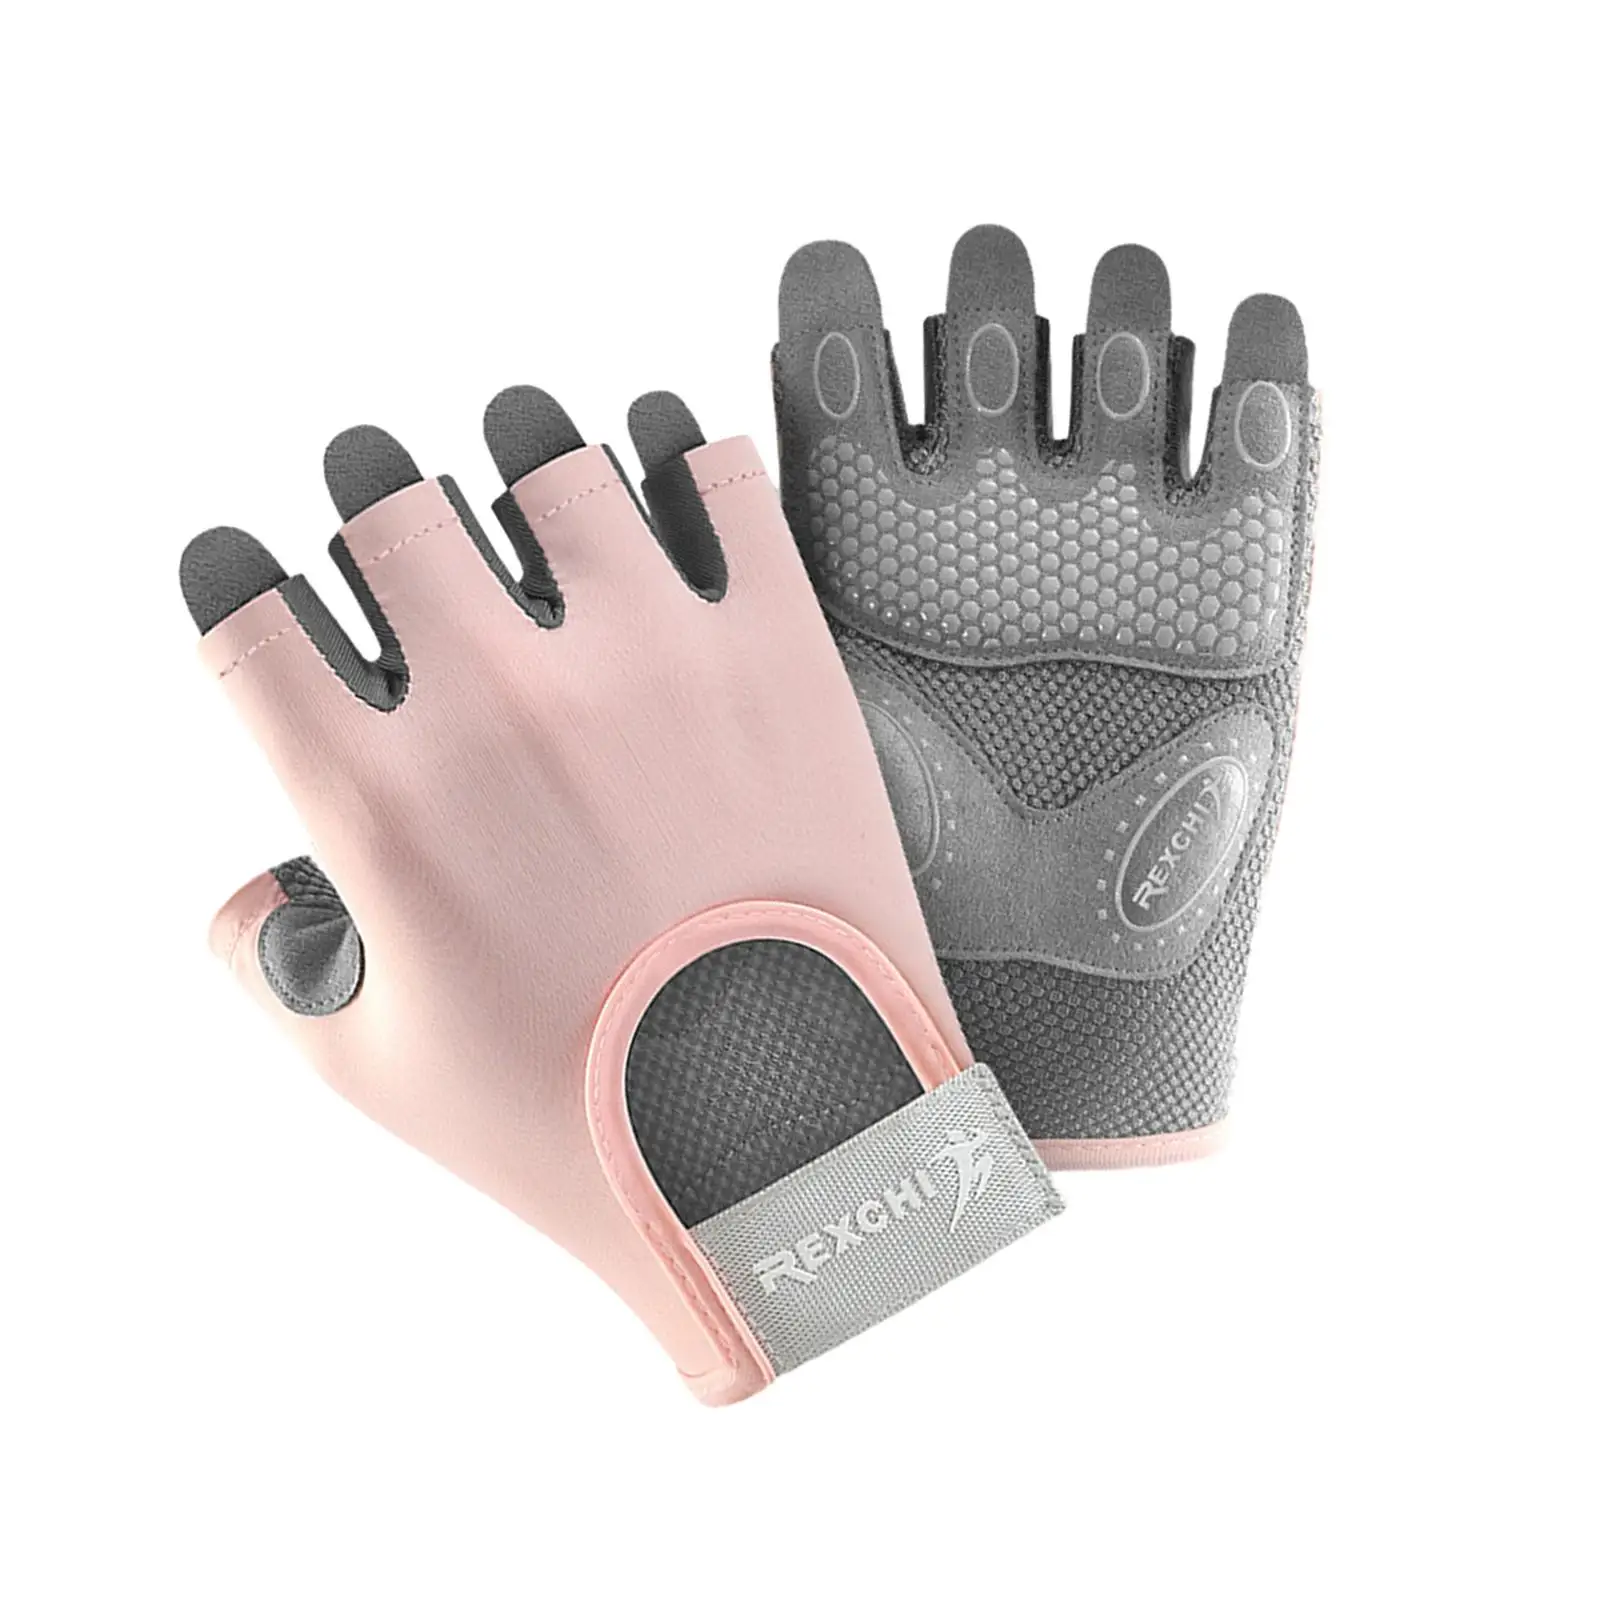 Road Bike Gloves Women Men Non Slip Sports Cycling Gloves Fitness Gloves Workout Weight Lifting Gloves for Gym Strength Training